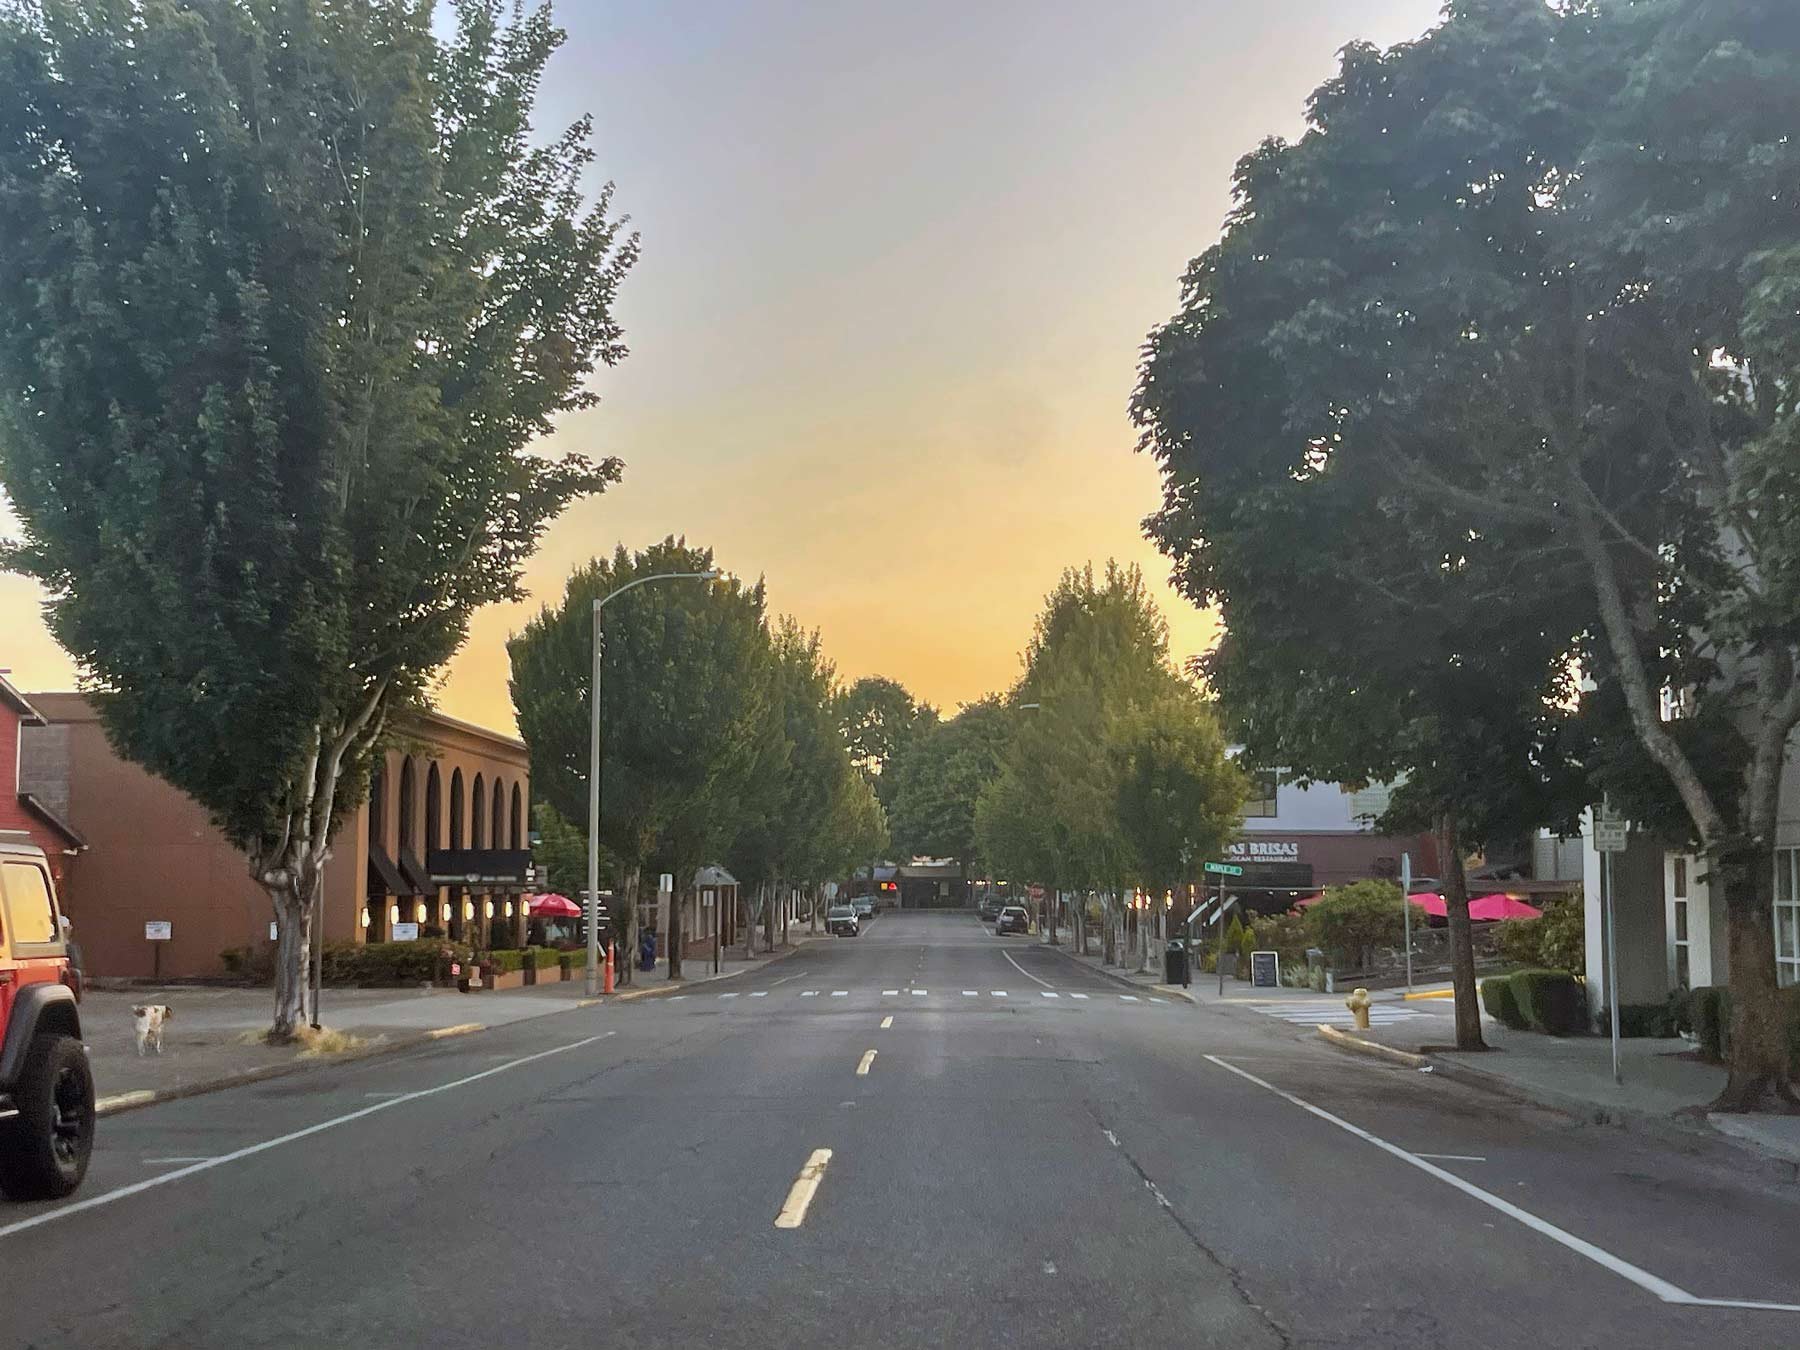 Downtown-Edmonds-wa-with-beautful-tree-lined-streets-at-sunrise